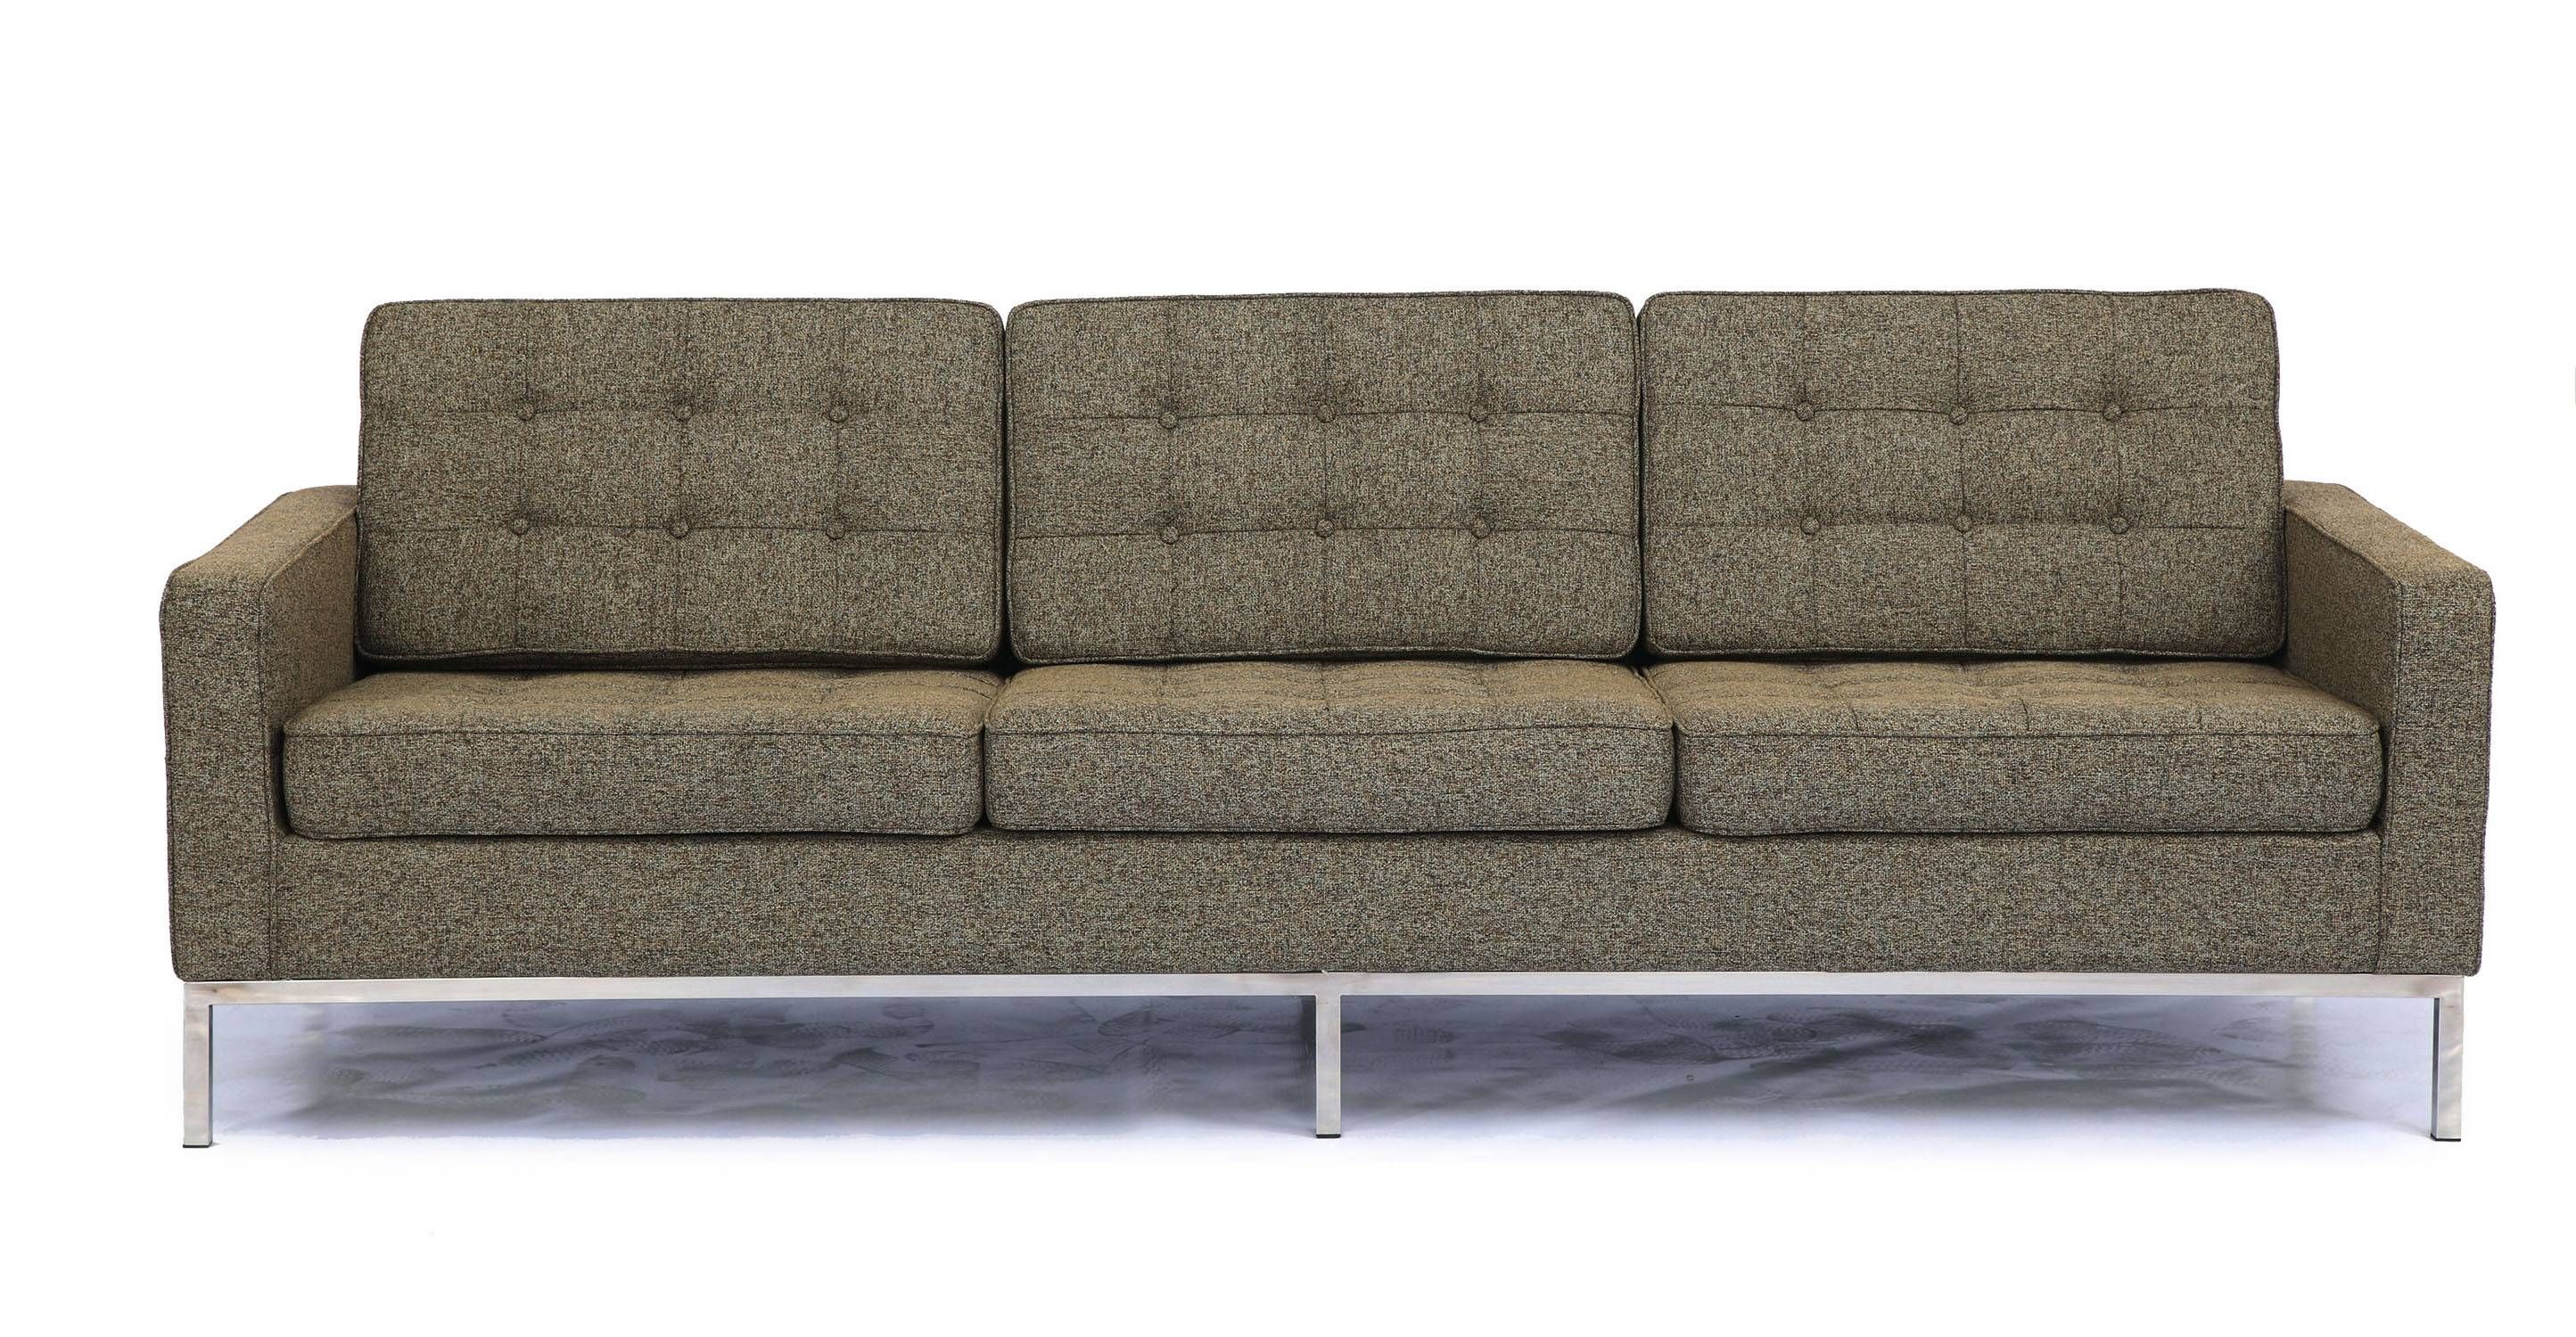 Decoration Knoll Florence Sofa With Florence Knoll Sofa Florence For Florence Medium Sofas (View 12 of 25)